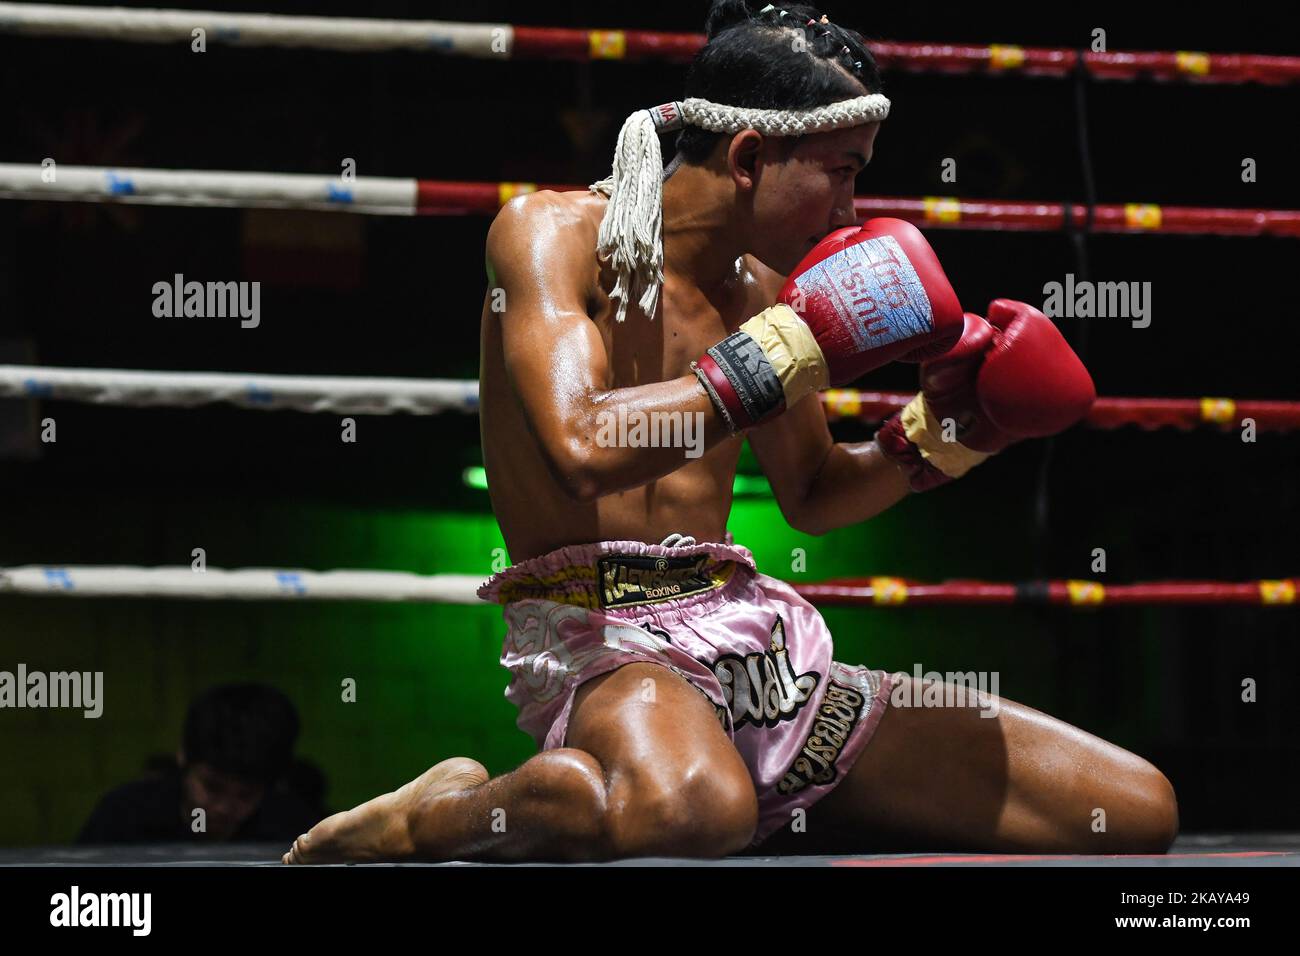 Plerngarom during his introduction ahead of for his Thai boxing combat against Pongsin in 54kg category, during Muaythai Monday Evening International Thai Boxing Gala in Thaphae Stadium in Chiang Mai. On Monday, June 11, 2018, Chiang Mai, Chiang Mai Province, Thailand. (Photo by Artur Widak/NurPhoto)  Stock Photo